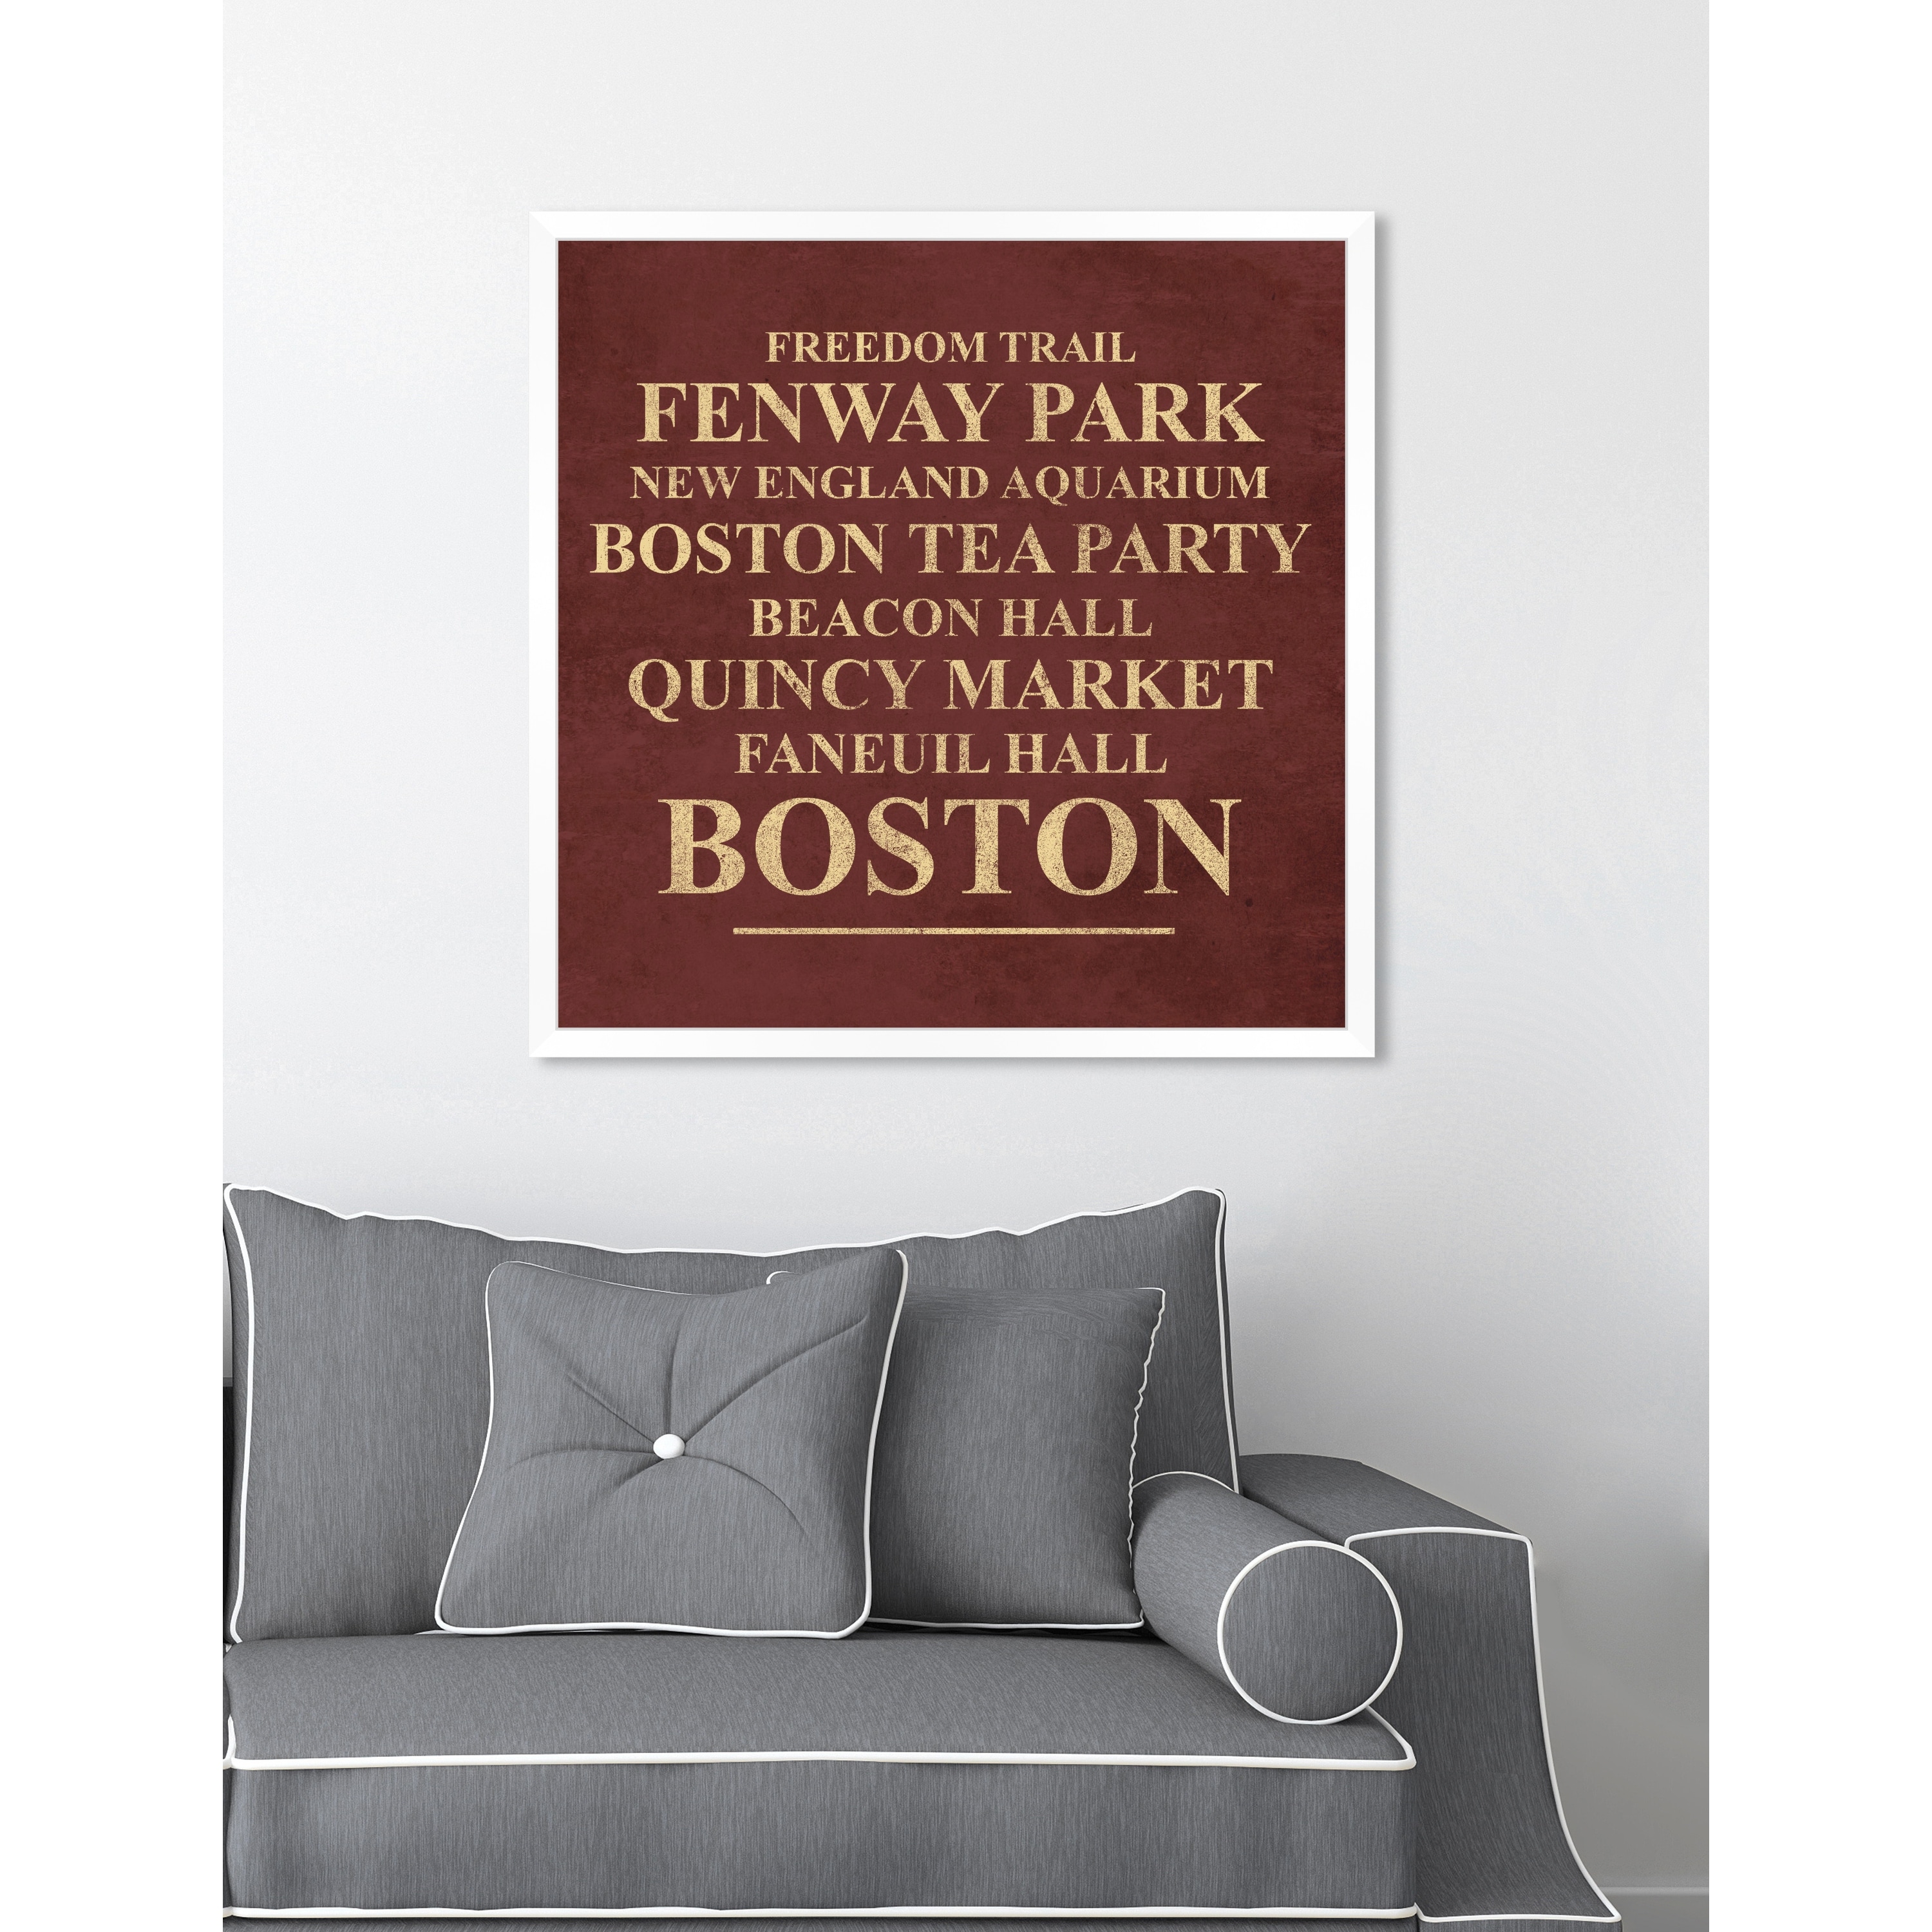 Framed Boston Red Sox 2013 World Series Champions Composite 34x22.5 Sports Poster - 34 x 22